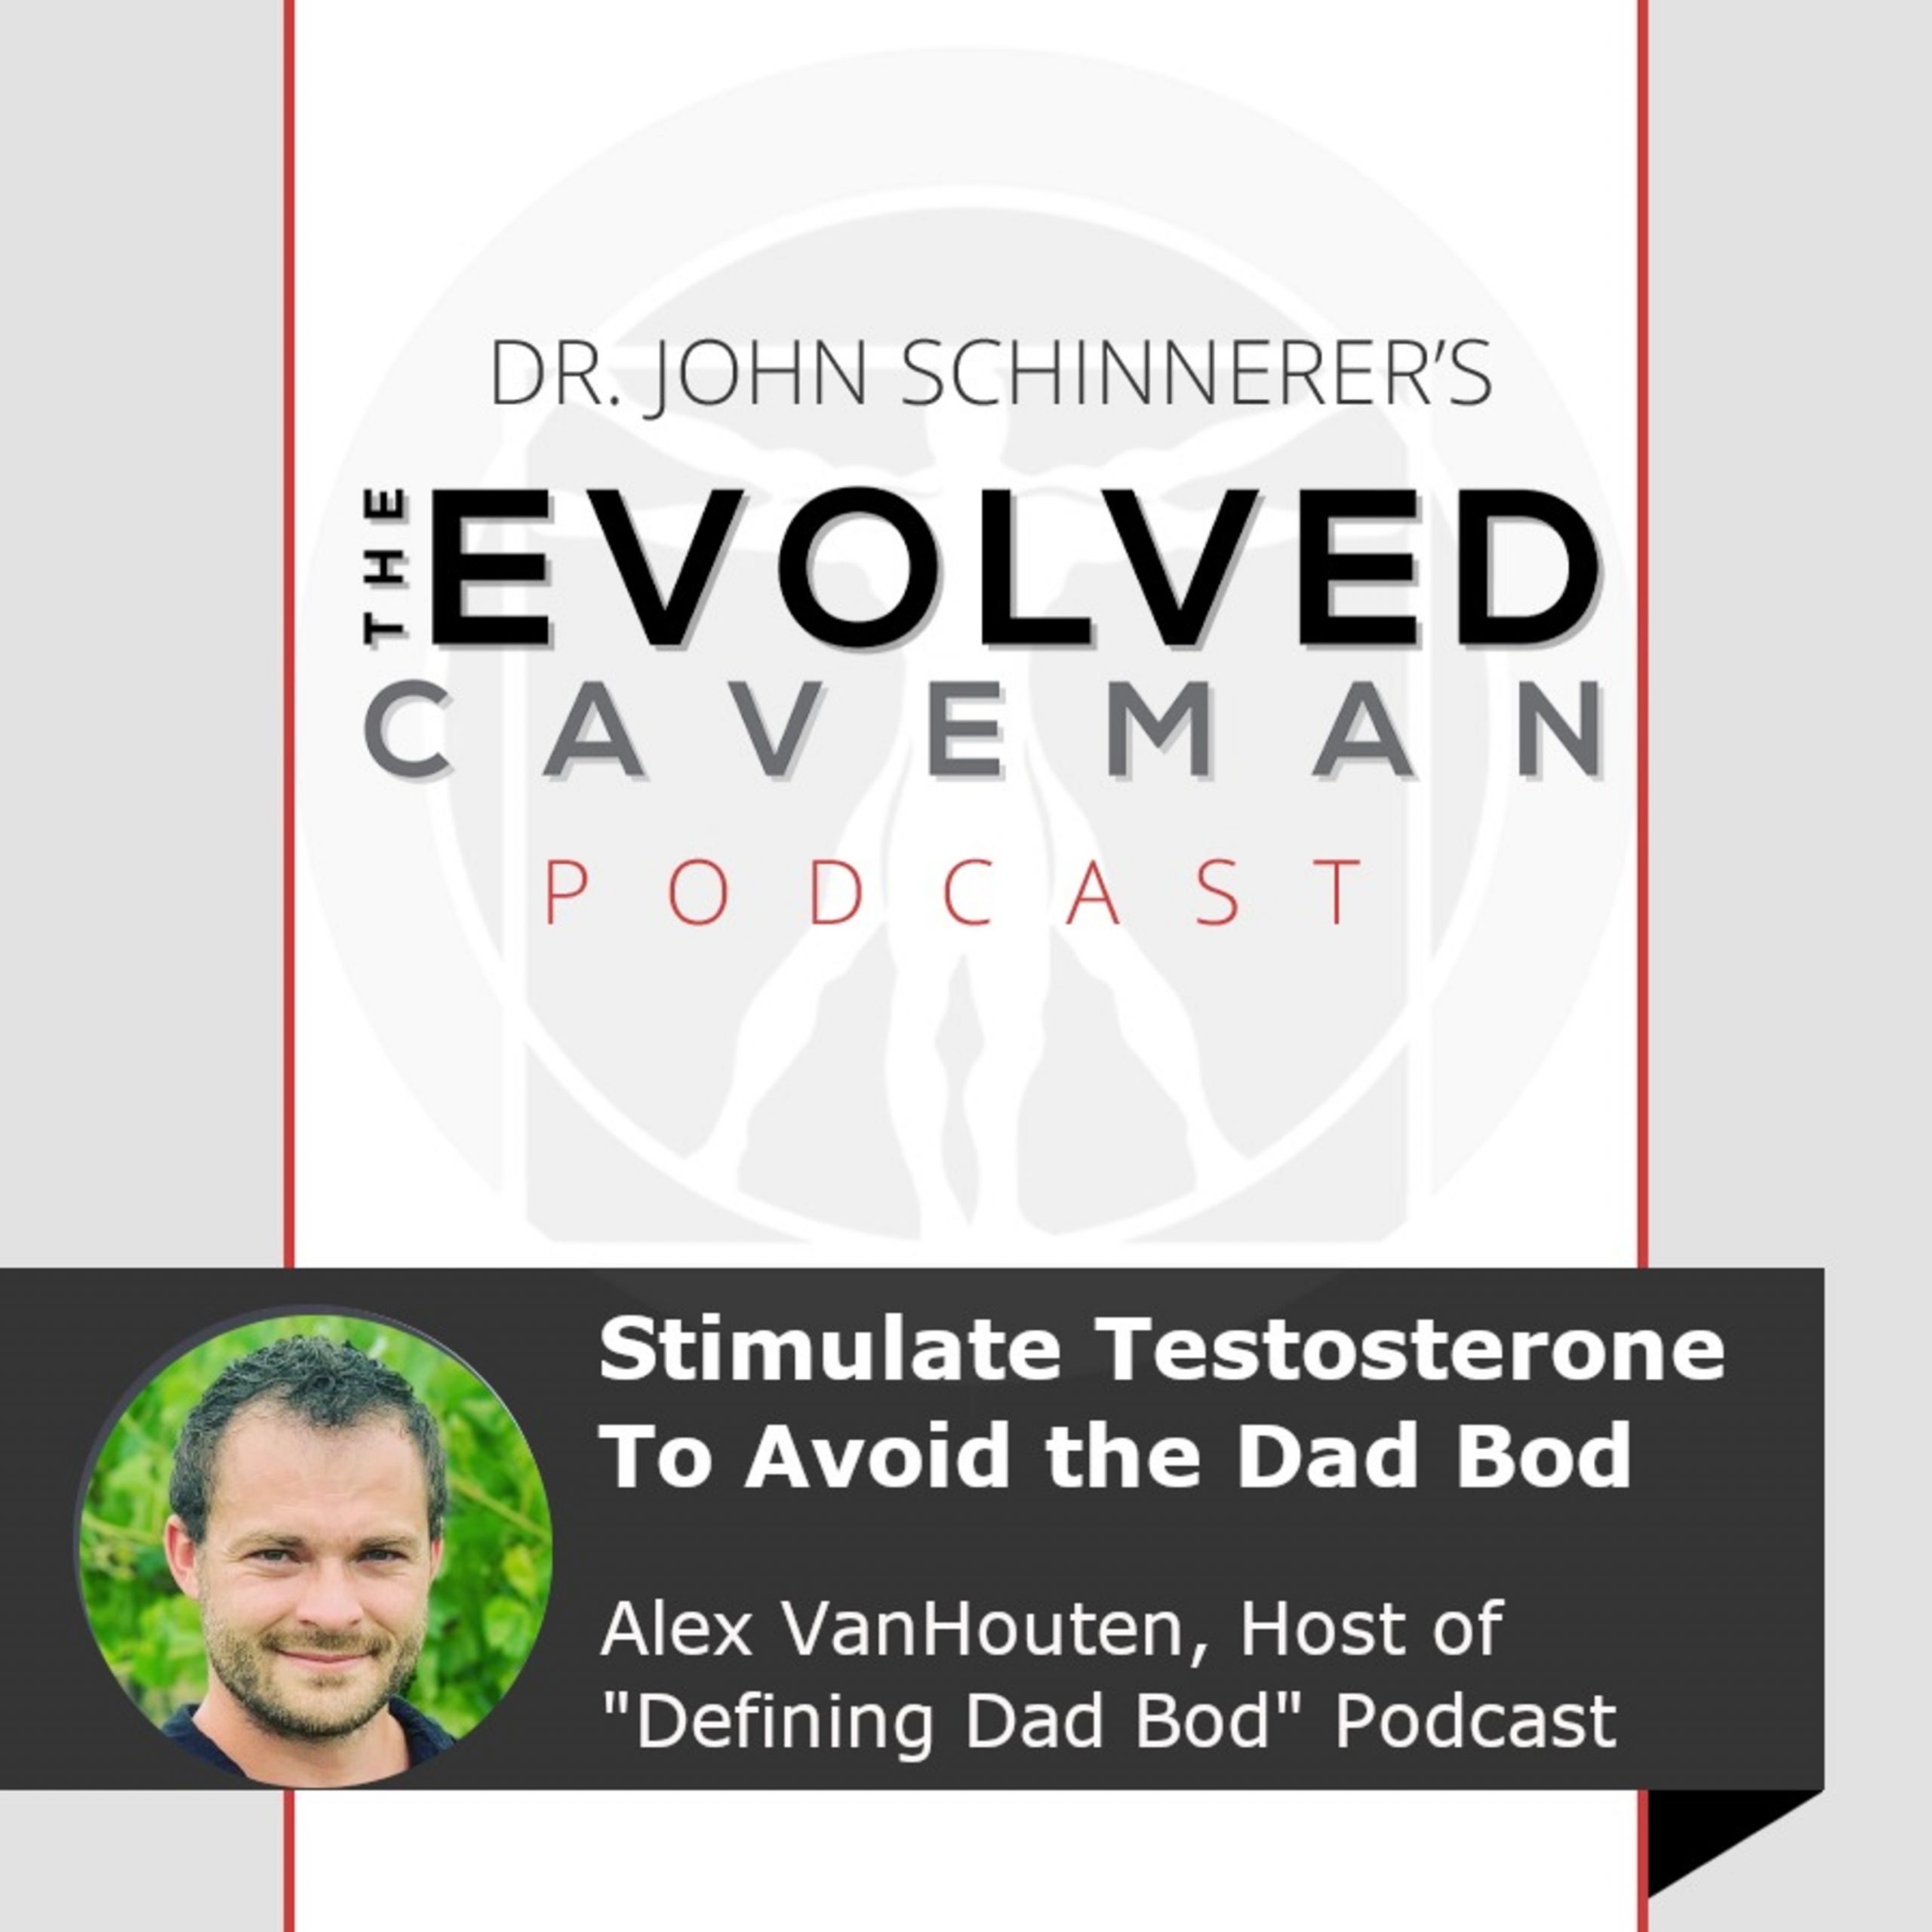 Stimulate Testosterone Production To Avoid The Dad Bod